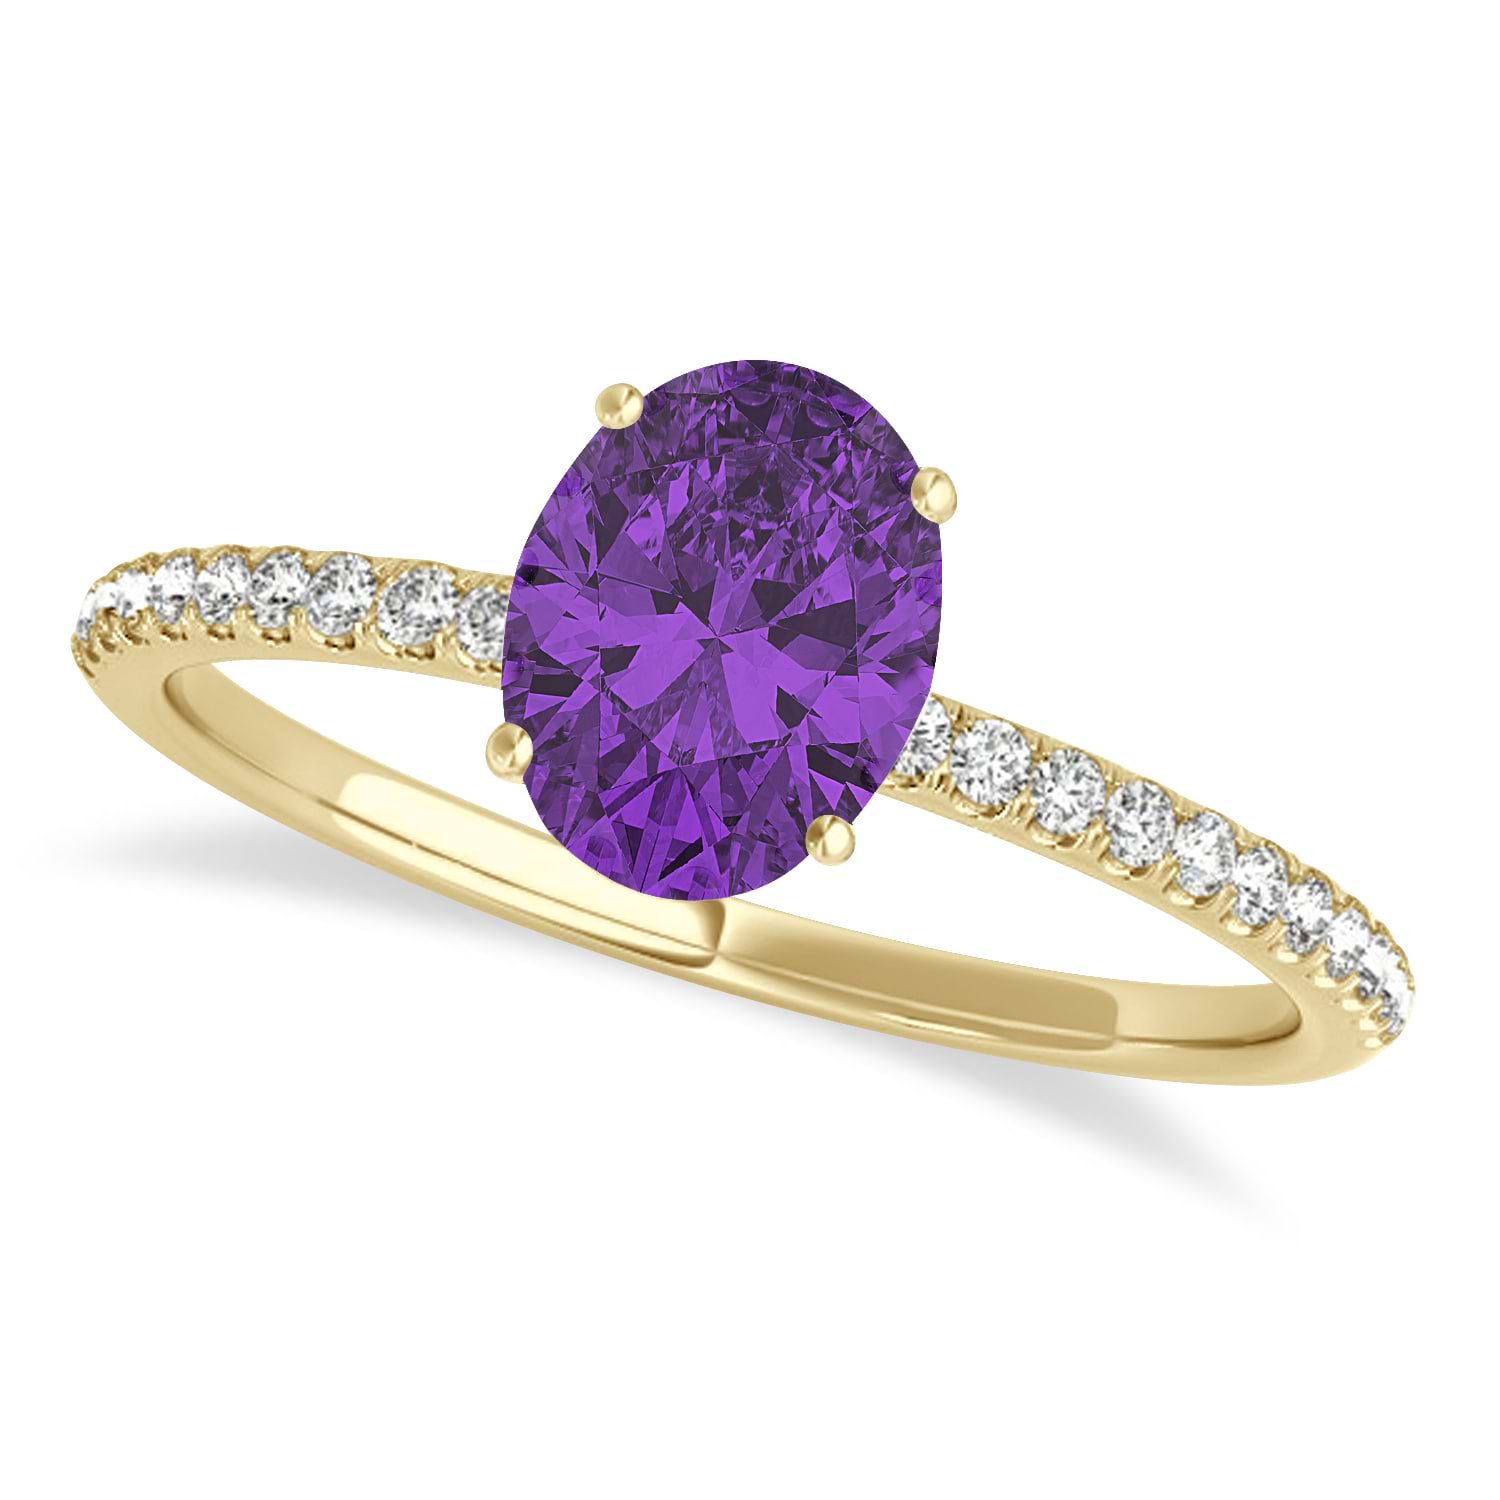 Amethyst & Diamond Accented Oval Shape Engagement Ring 18k Yellow Gold (1.00ct)